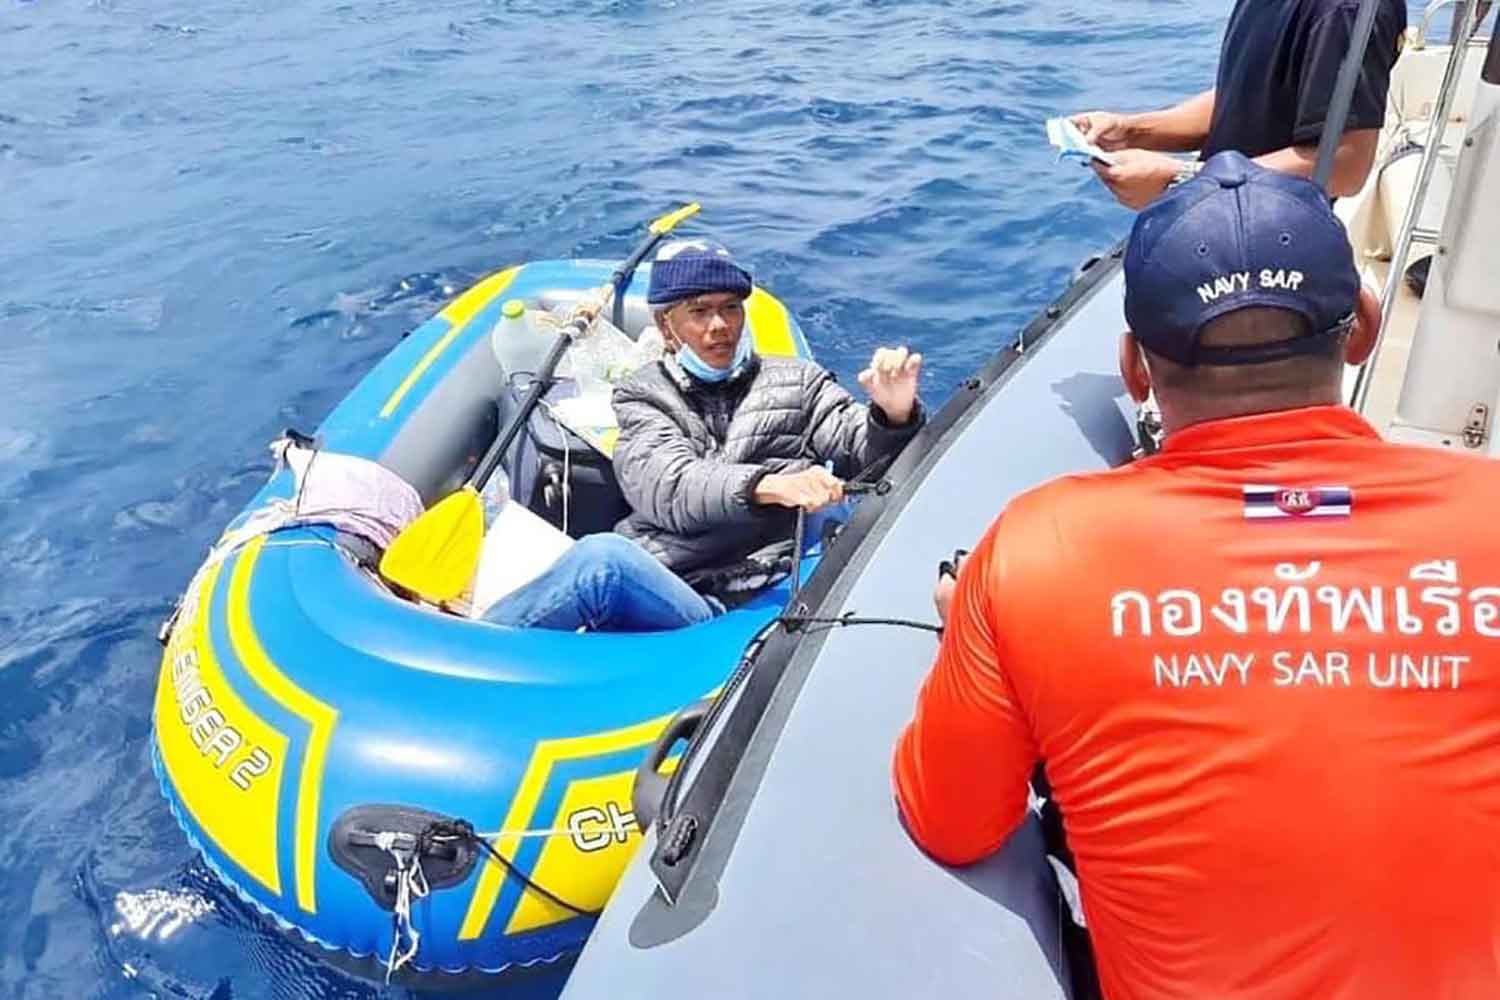 A Vietnamese man is shocked when sailing alone to India, the purpose of crossing the sea more than 2000km is extremely unbelievable - Photo 1.